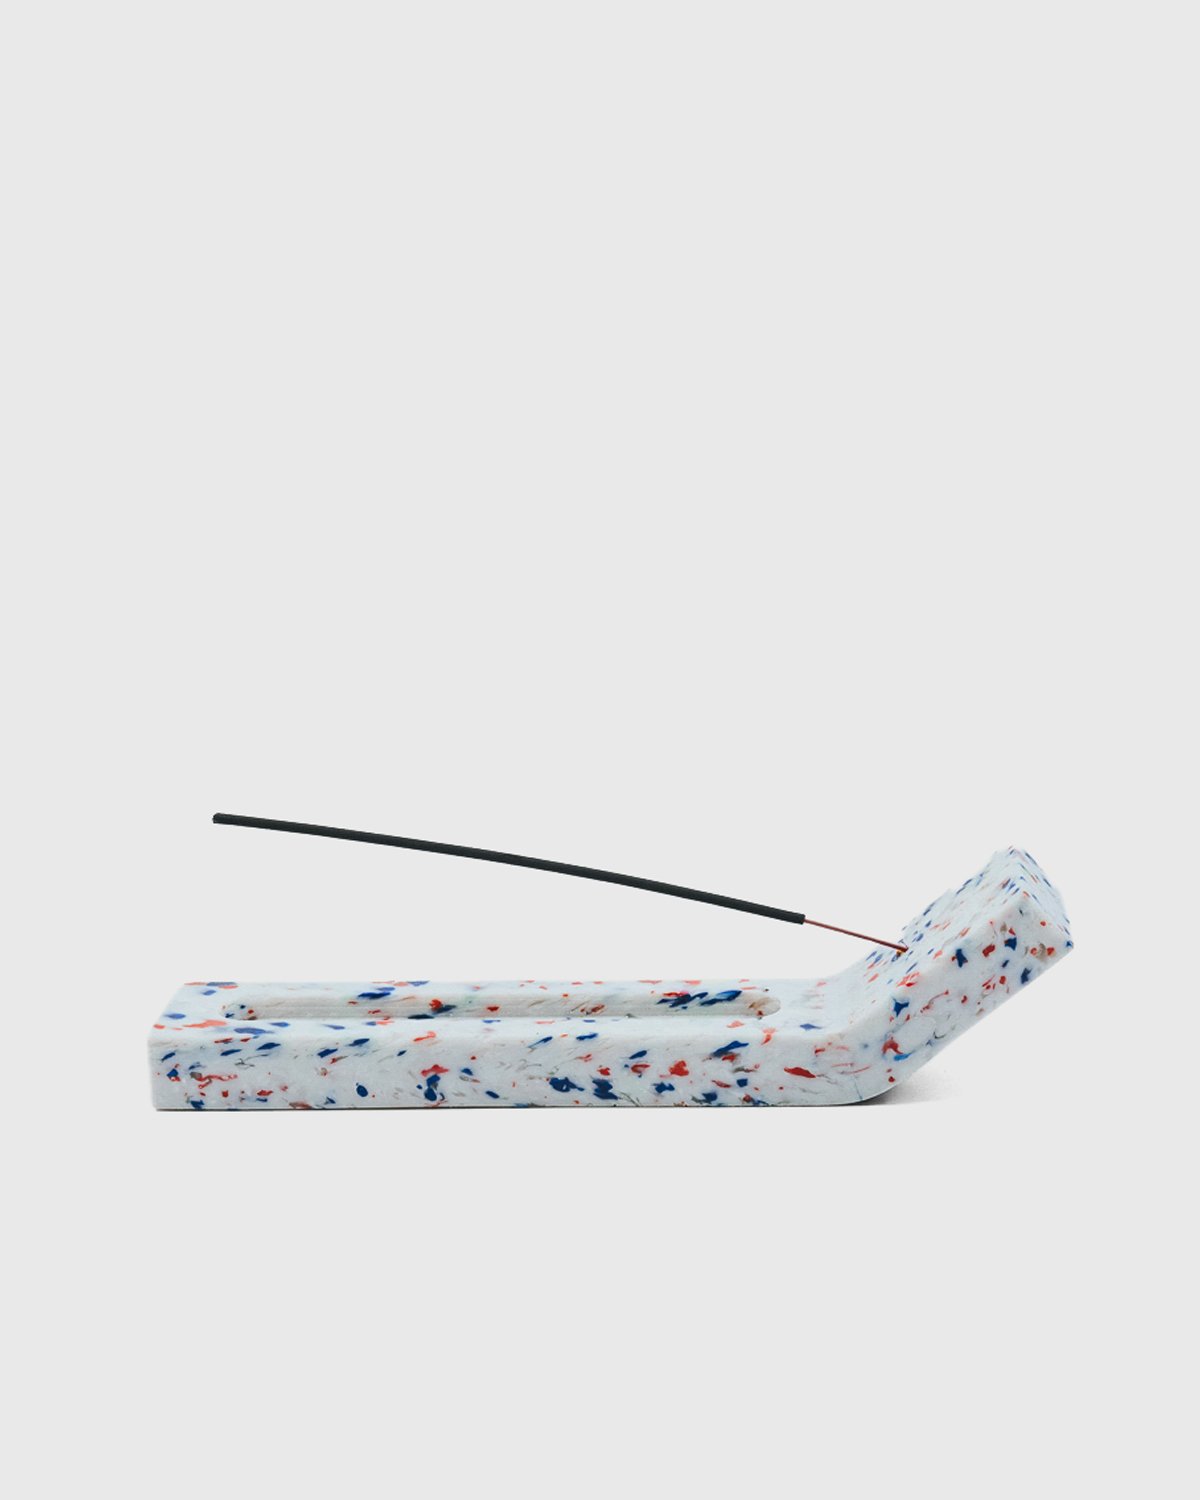 Space Available Studio - Incense Holder White - Lifestyle - White - Image 1